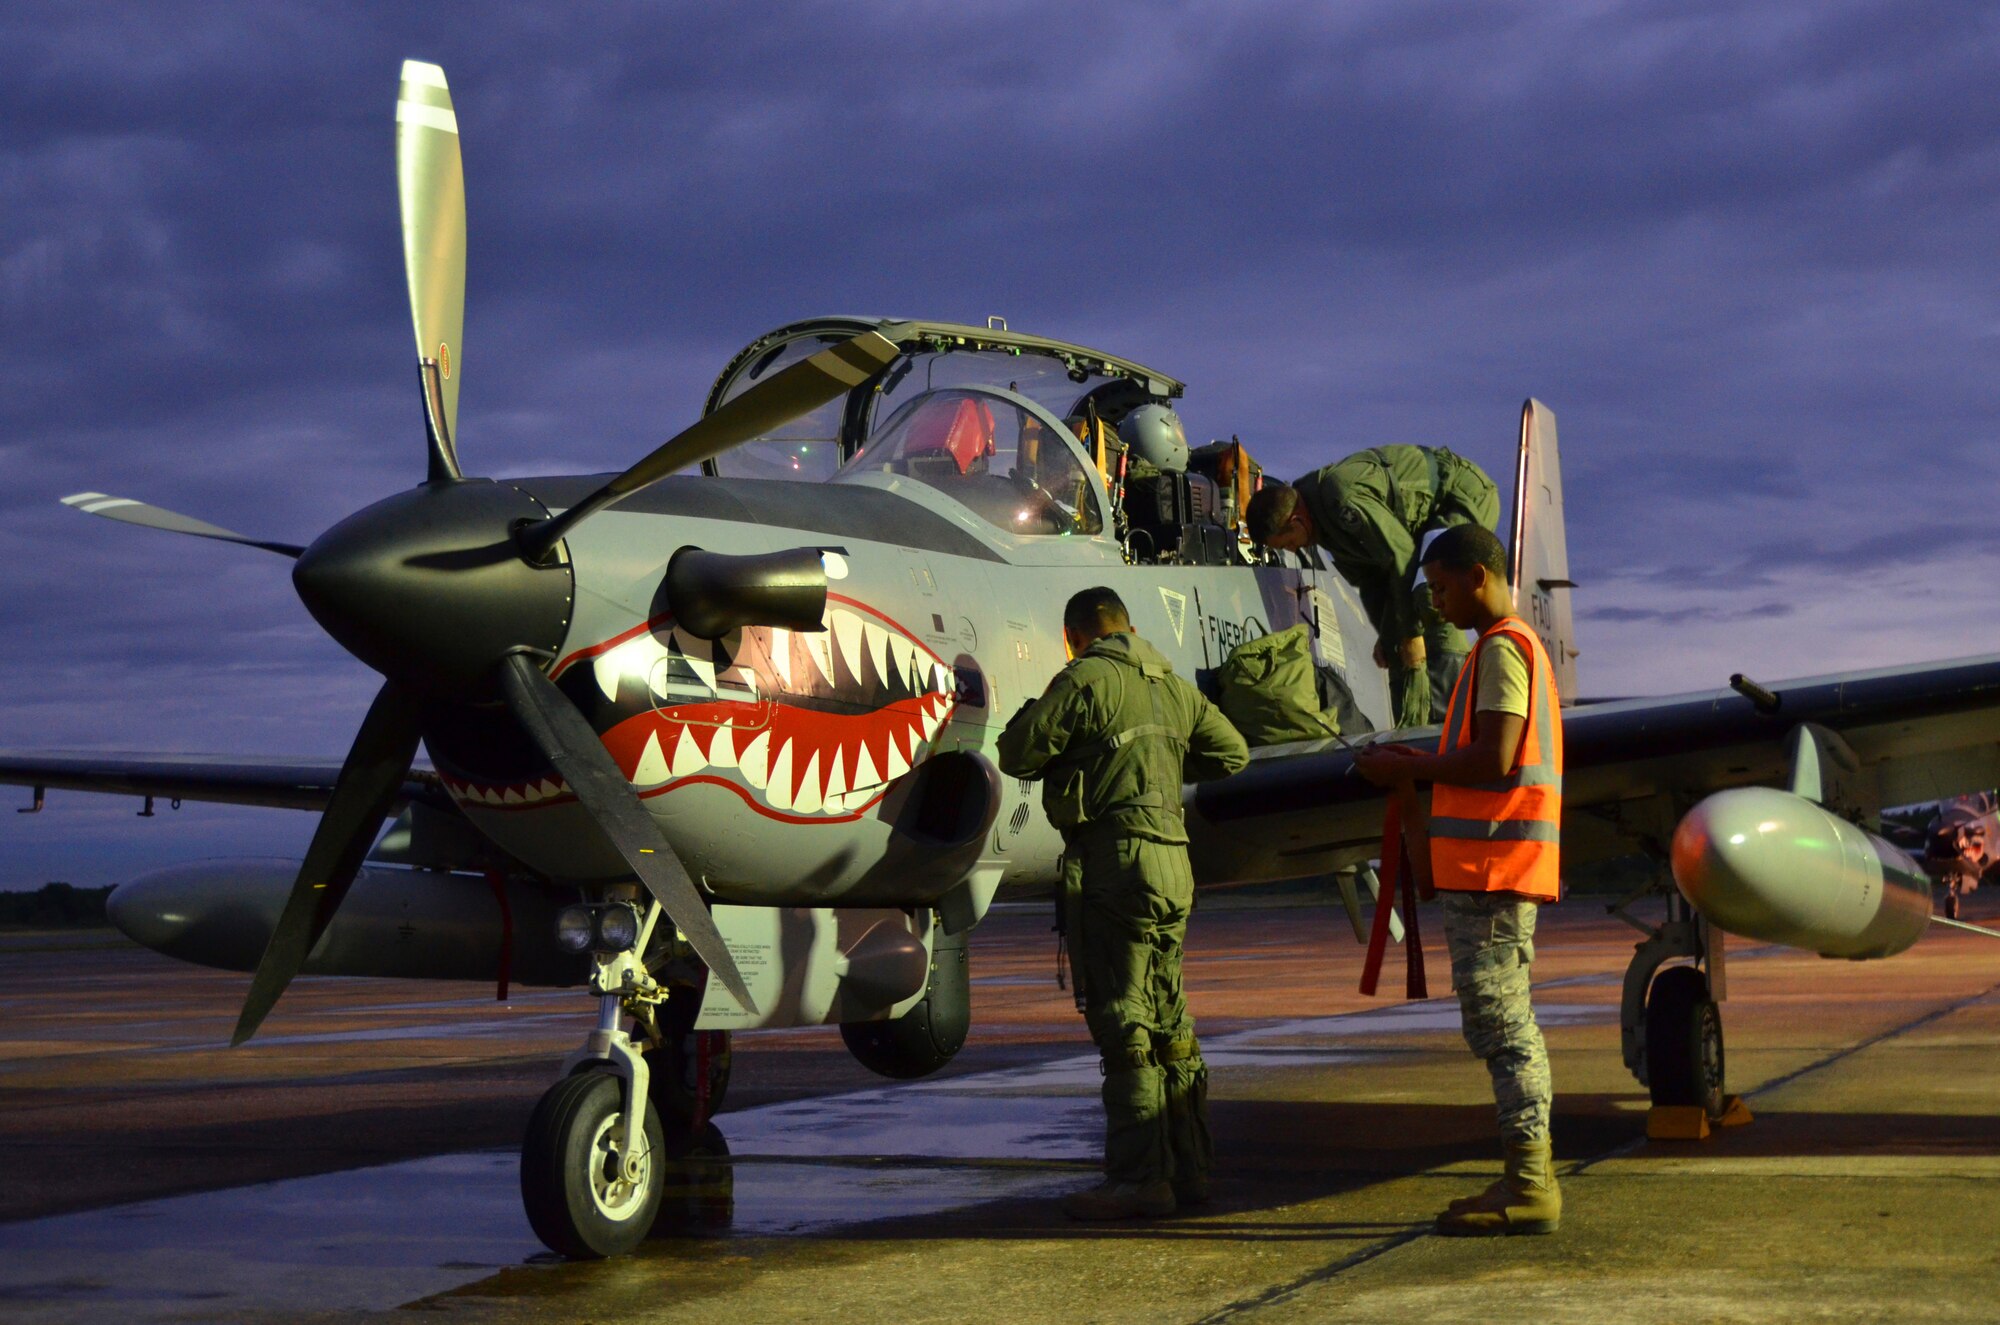 A Dominican Republic air force pilot and maintenance airman inspect an A-29 Super Tucano for a nighttime flight Dec. 4, 2013, as part of an exercise to detect and track illegal drug traffic. The exercise is part of the Sovereign Skies Program, an initiative between the U.S., Colombian, and Dominican Republic air forces to share best-practices on procedures to detect, track and intercept illegal drugs moving north from South America. Since the program’s inception, the number of aircraft suspected to traffic drugs through the Dominican Republic dropped from more than 100 annually to nearly zero. (U.S. Air Force photo/Capt. Justin Brockhoff) 